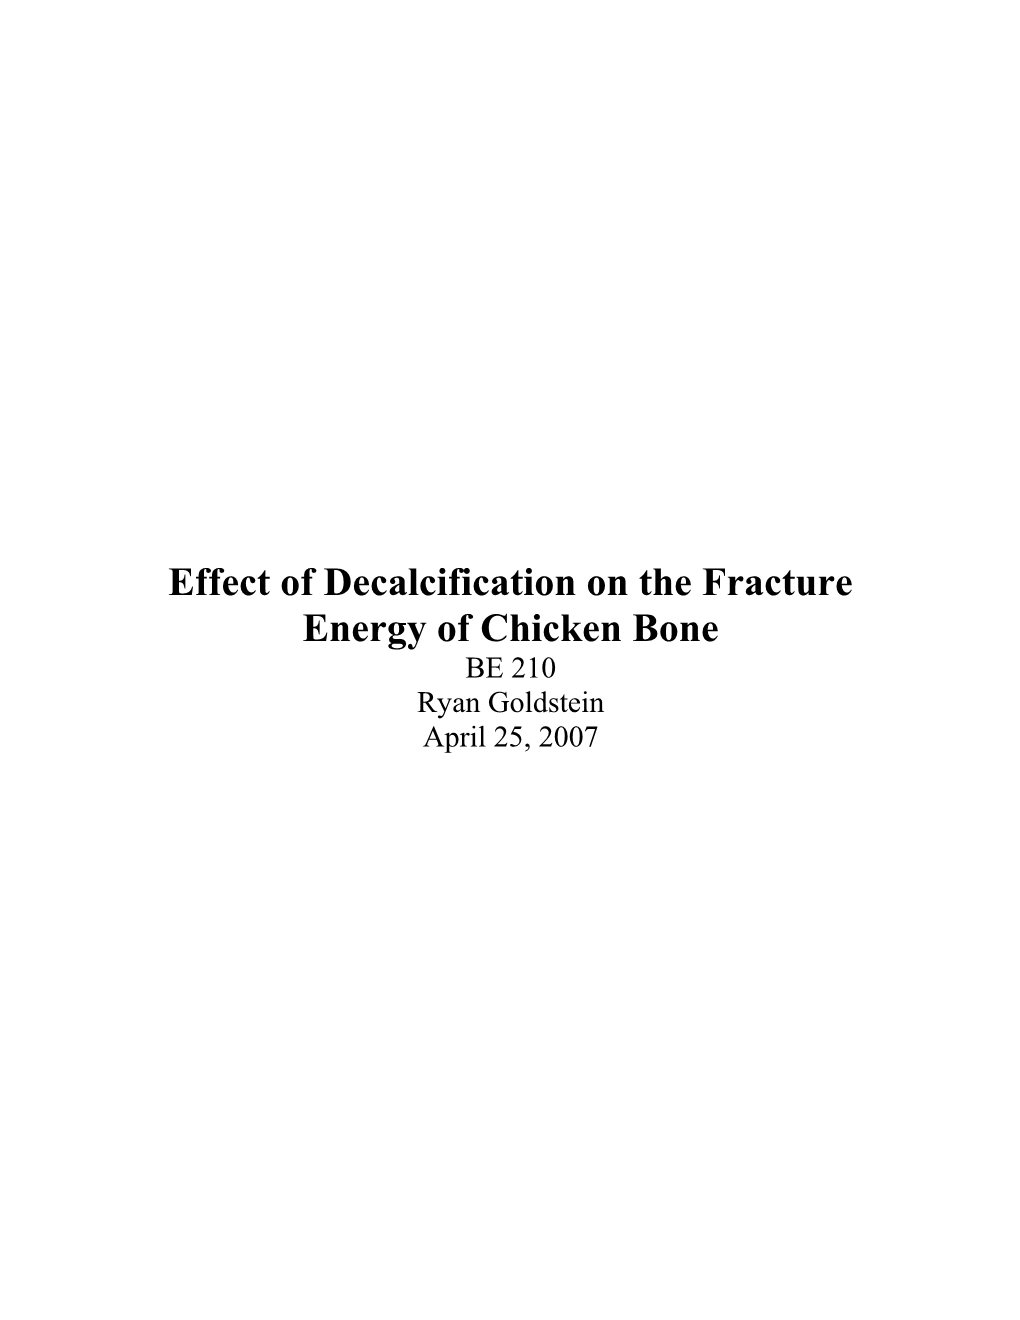 Effect of Decalcification on the Fracture Energy of Chicken Bone